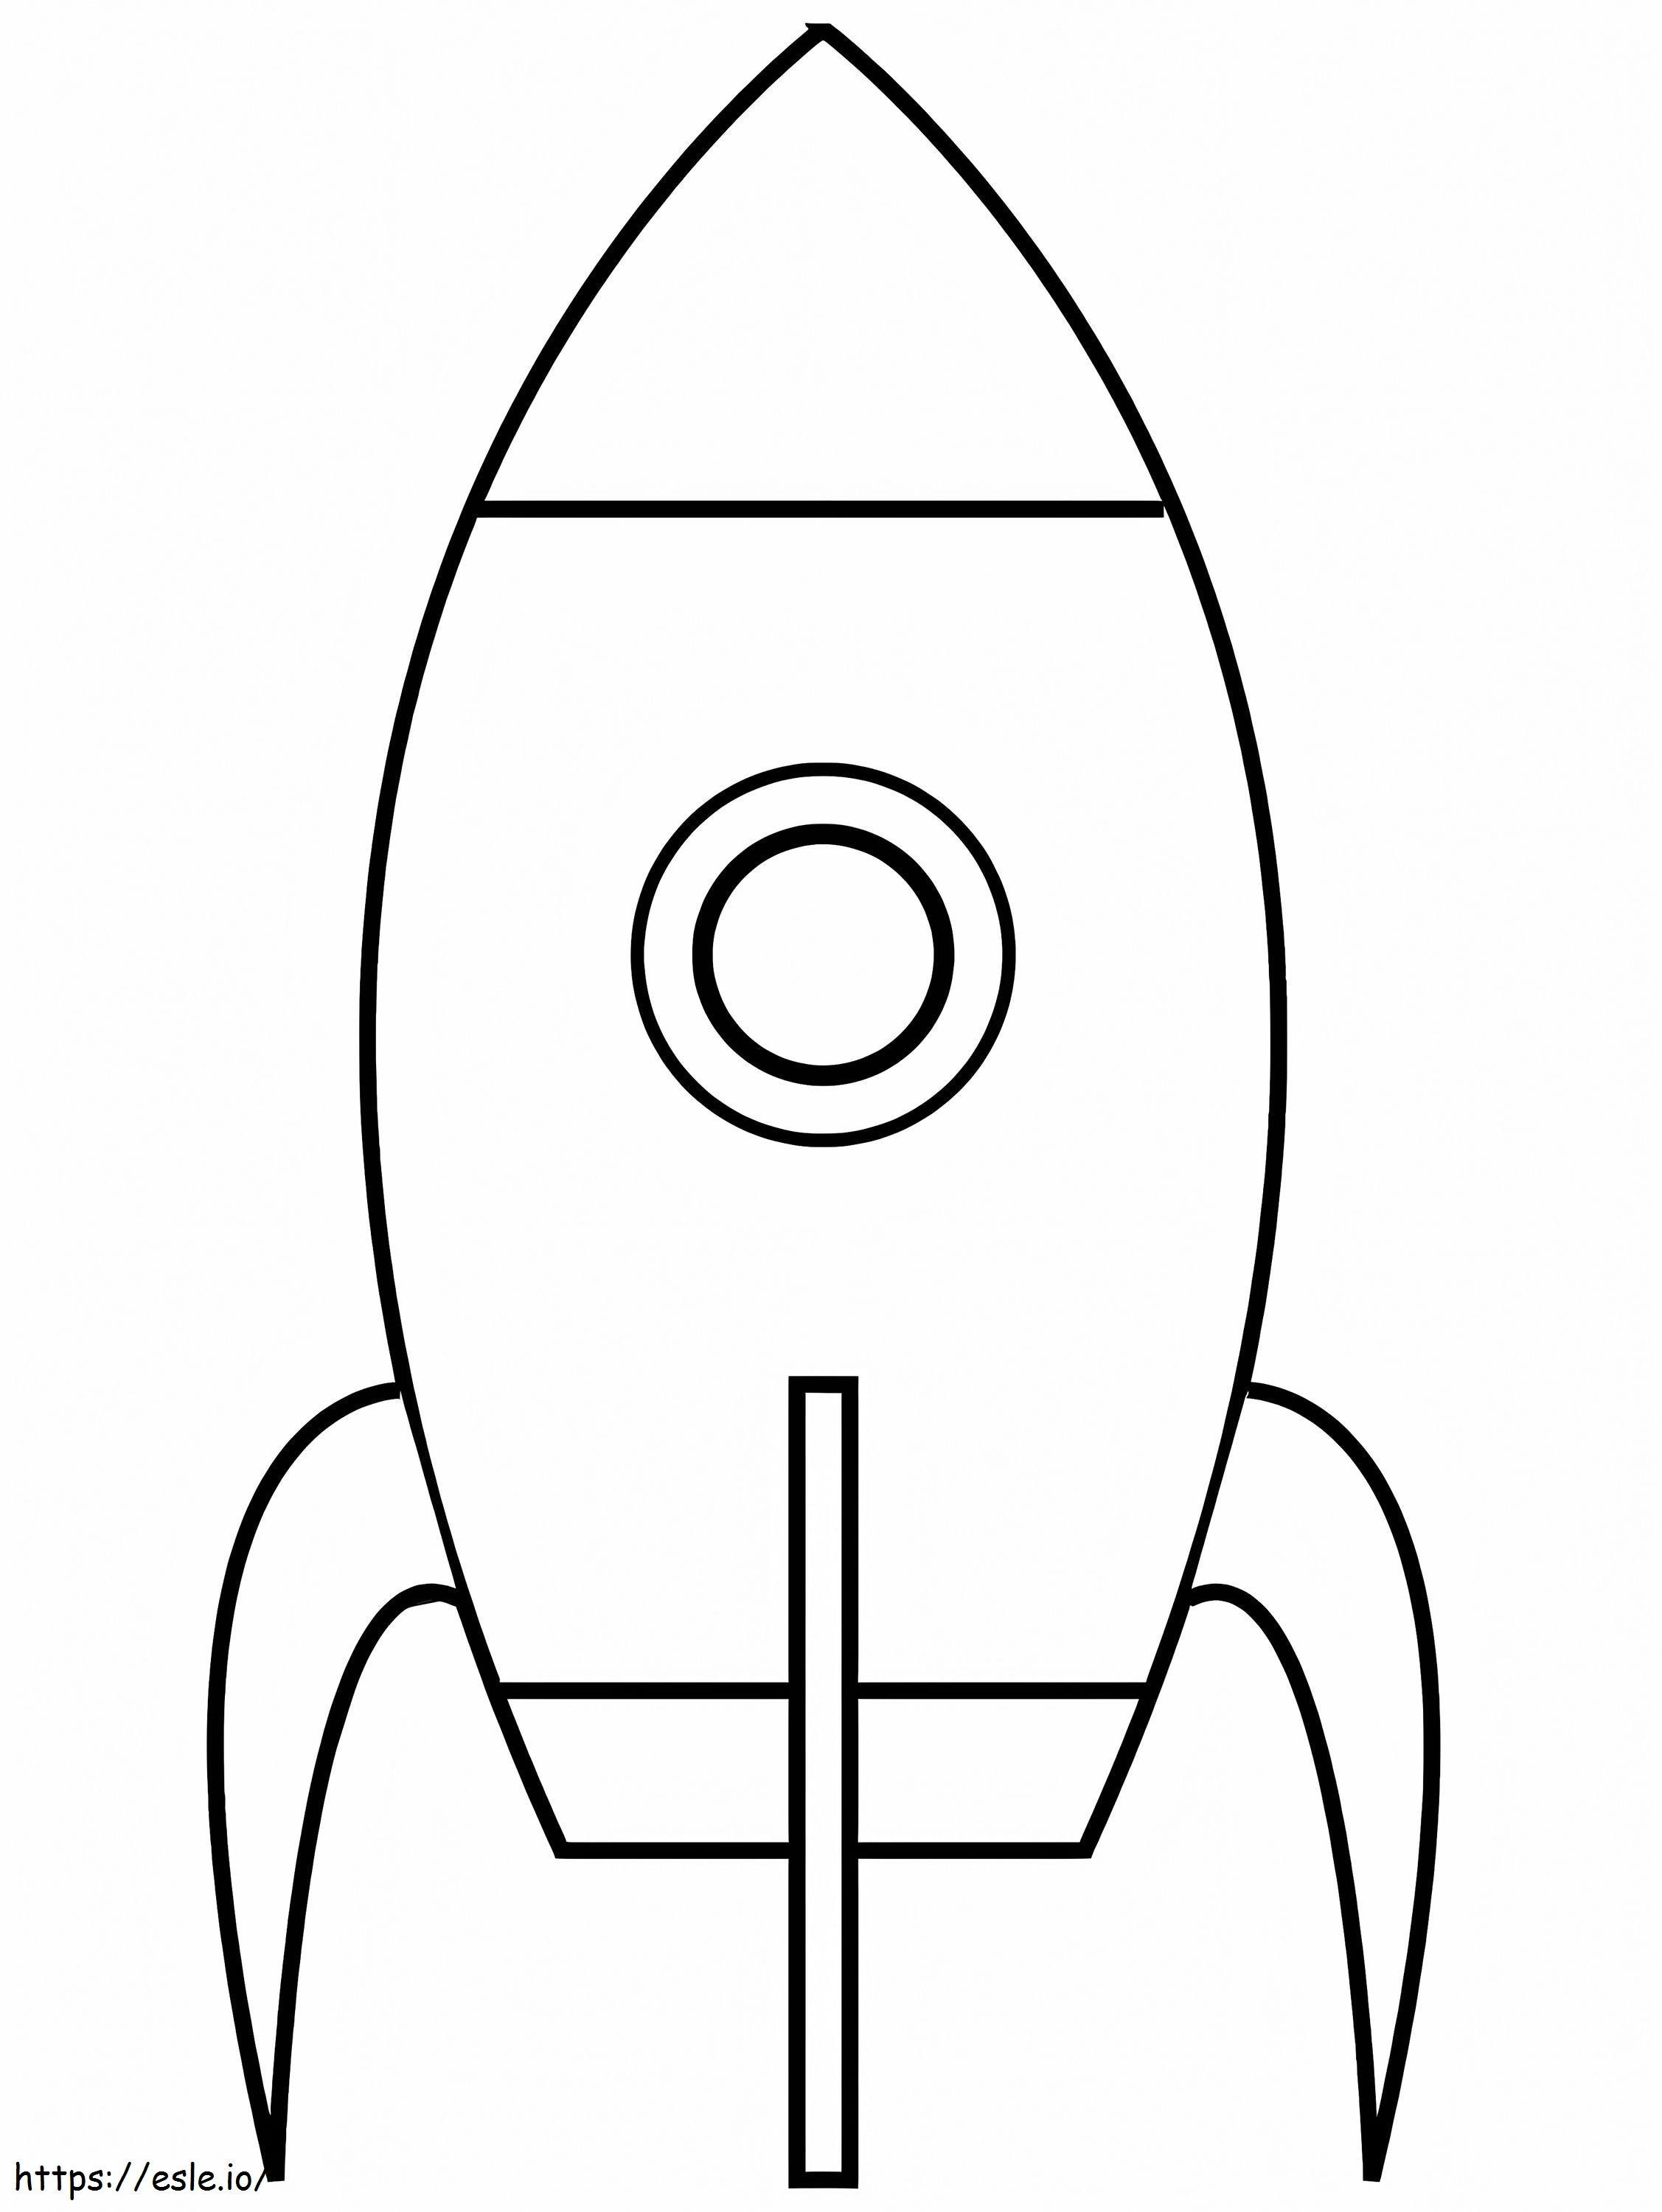 Fusee Three Simple coloring page